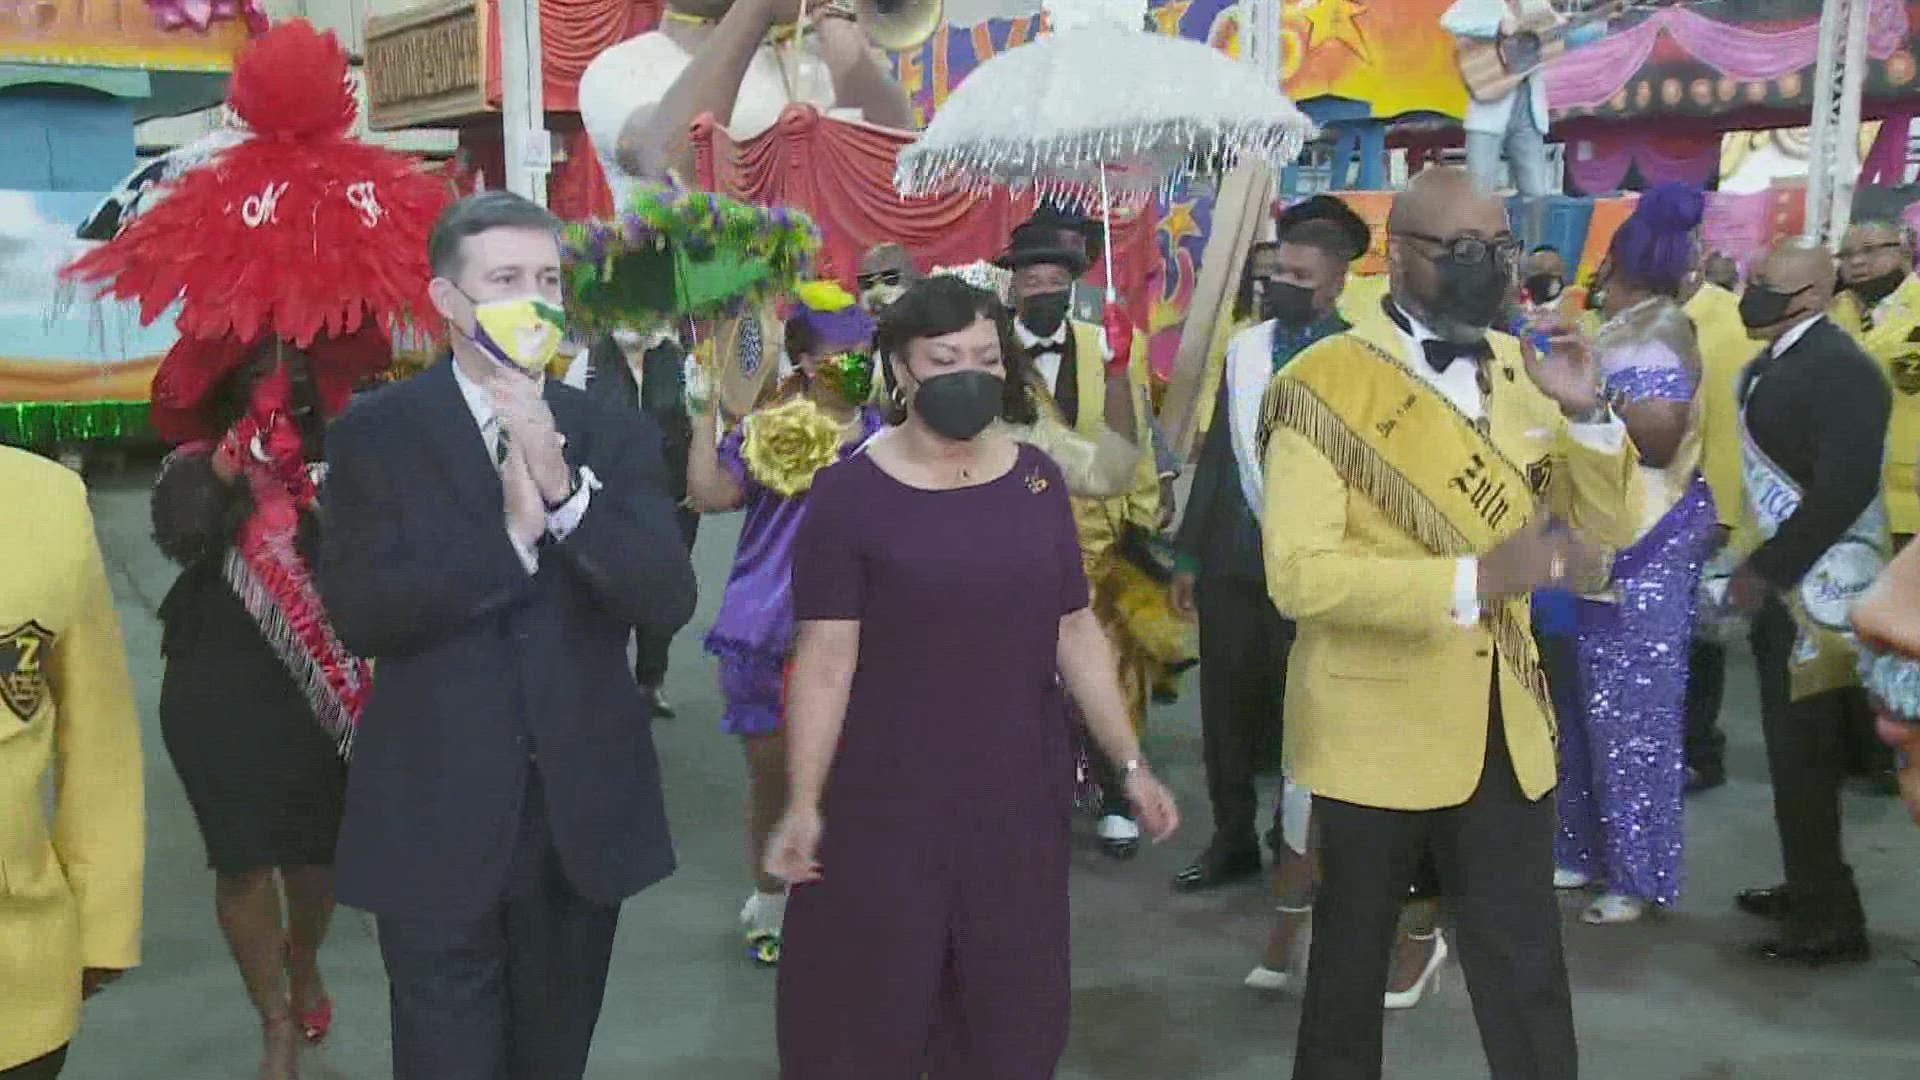 Mayor Cantrell has announced that Mardi Gras 2022 will roll like normal. Officials hope to have safe and healthy fun.